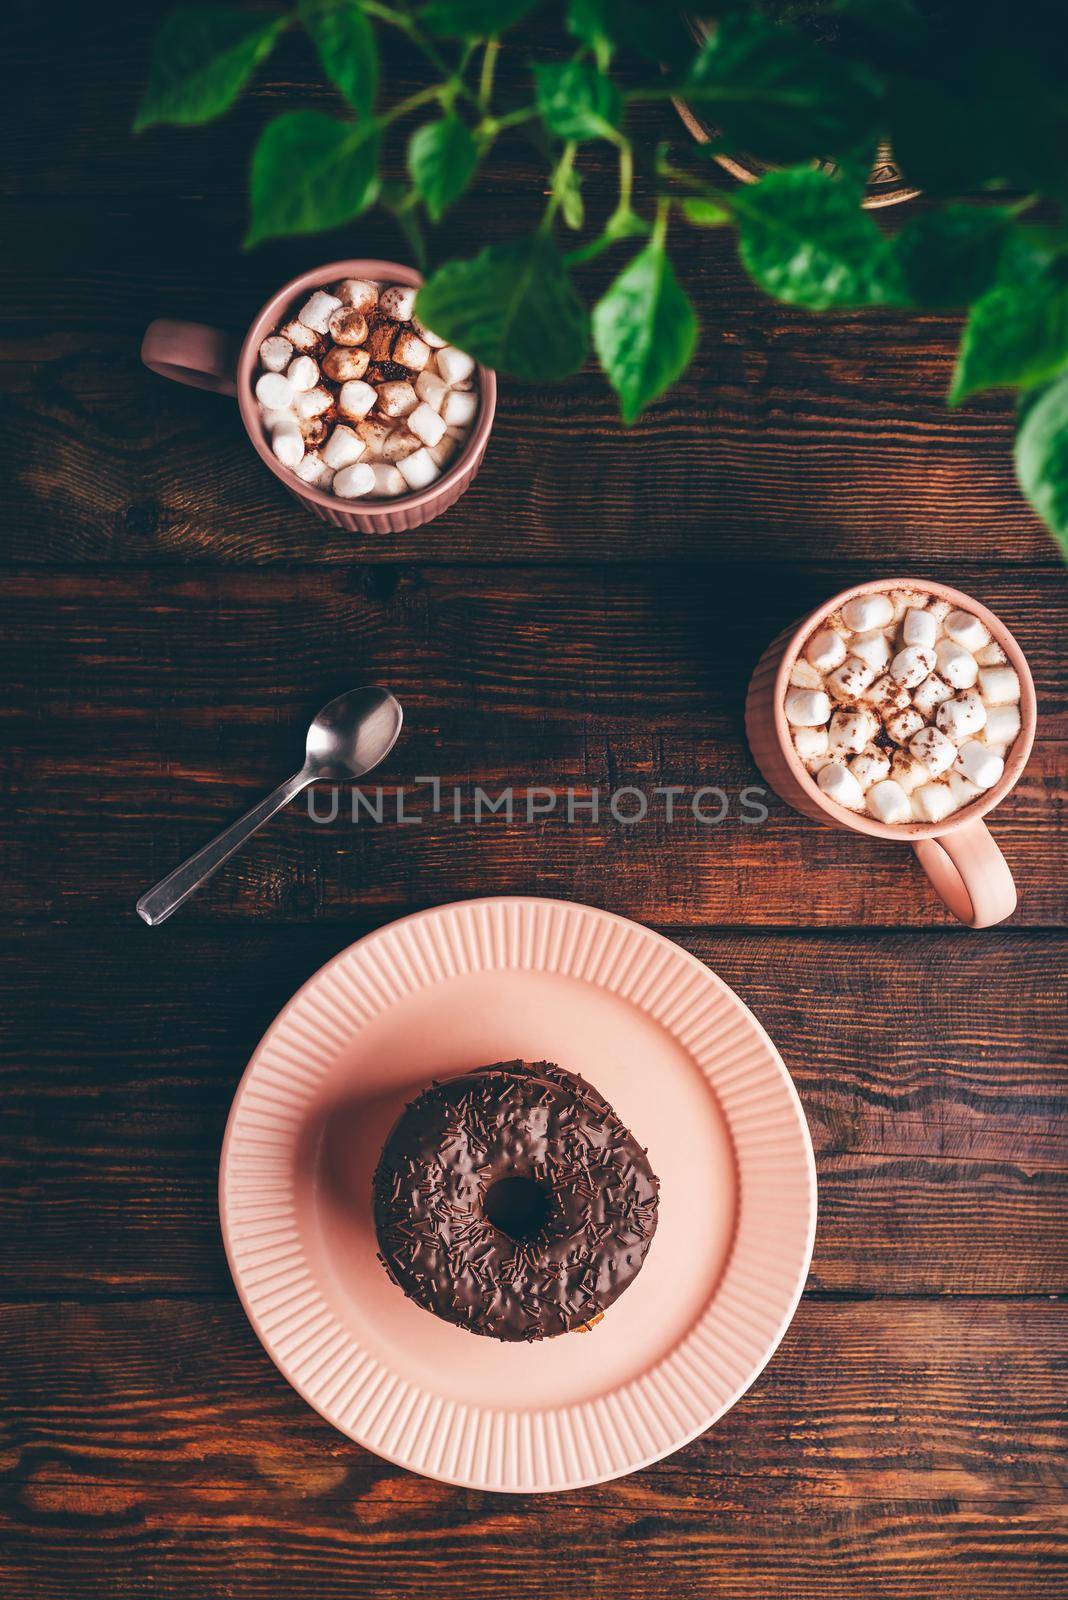 Stack of Homemade Chocolate Donuts and Mugs of Hot Chocolate with Marshmallow on Rustic Wooden Surface. View from Above